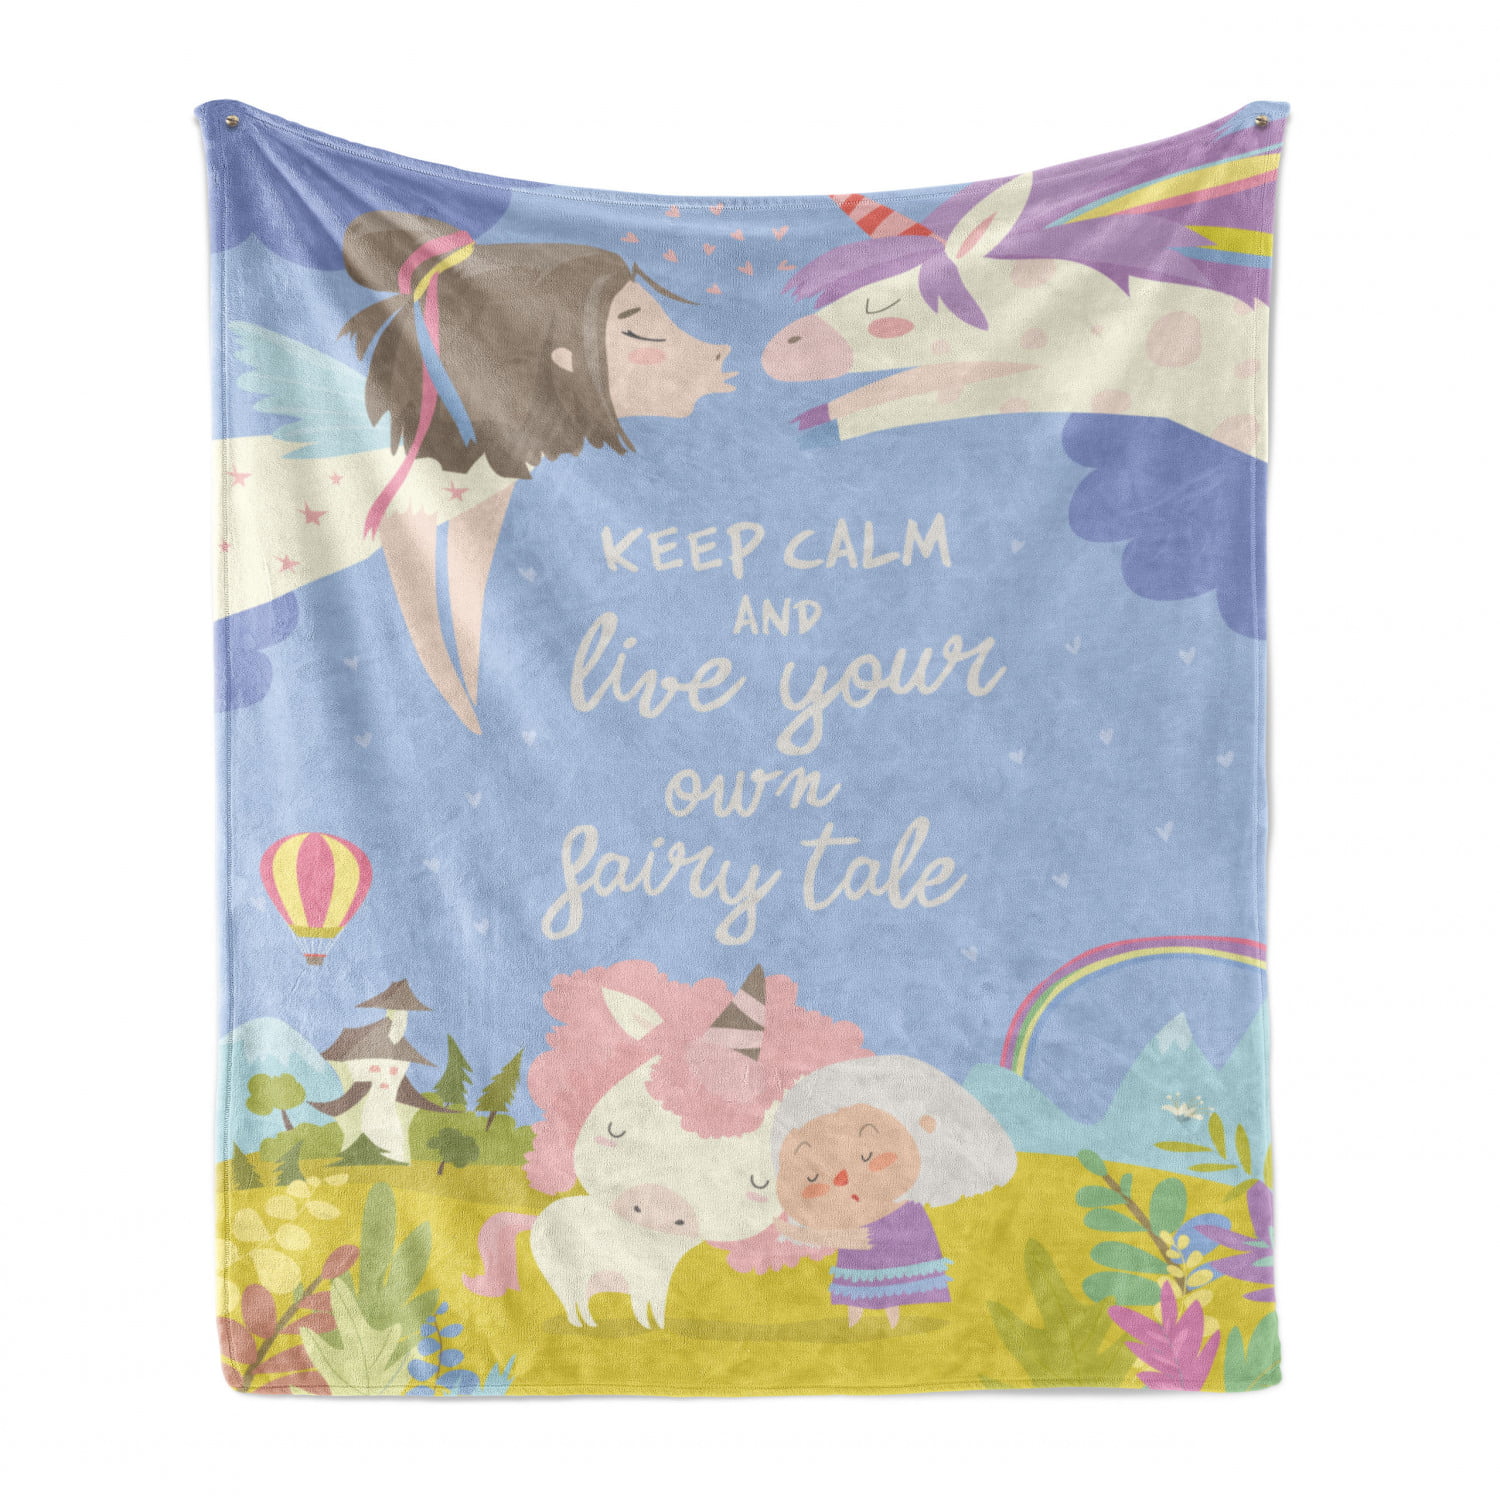 Cartoon Illustrated Keep Calm and Live Your Own Wording and Unicorn Motif Multicolor Ambesonne Kissing Soft Flannel Fleece Throw Blanket 70 x 90 Cozy Plush for Indoor and Outdoor Use 